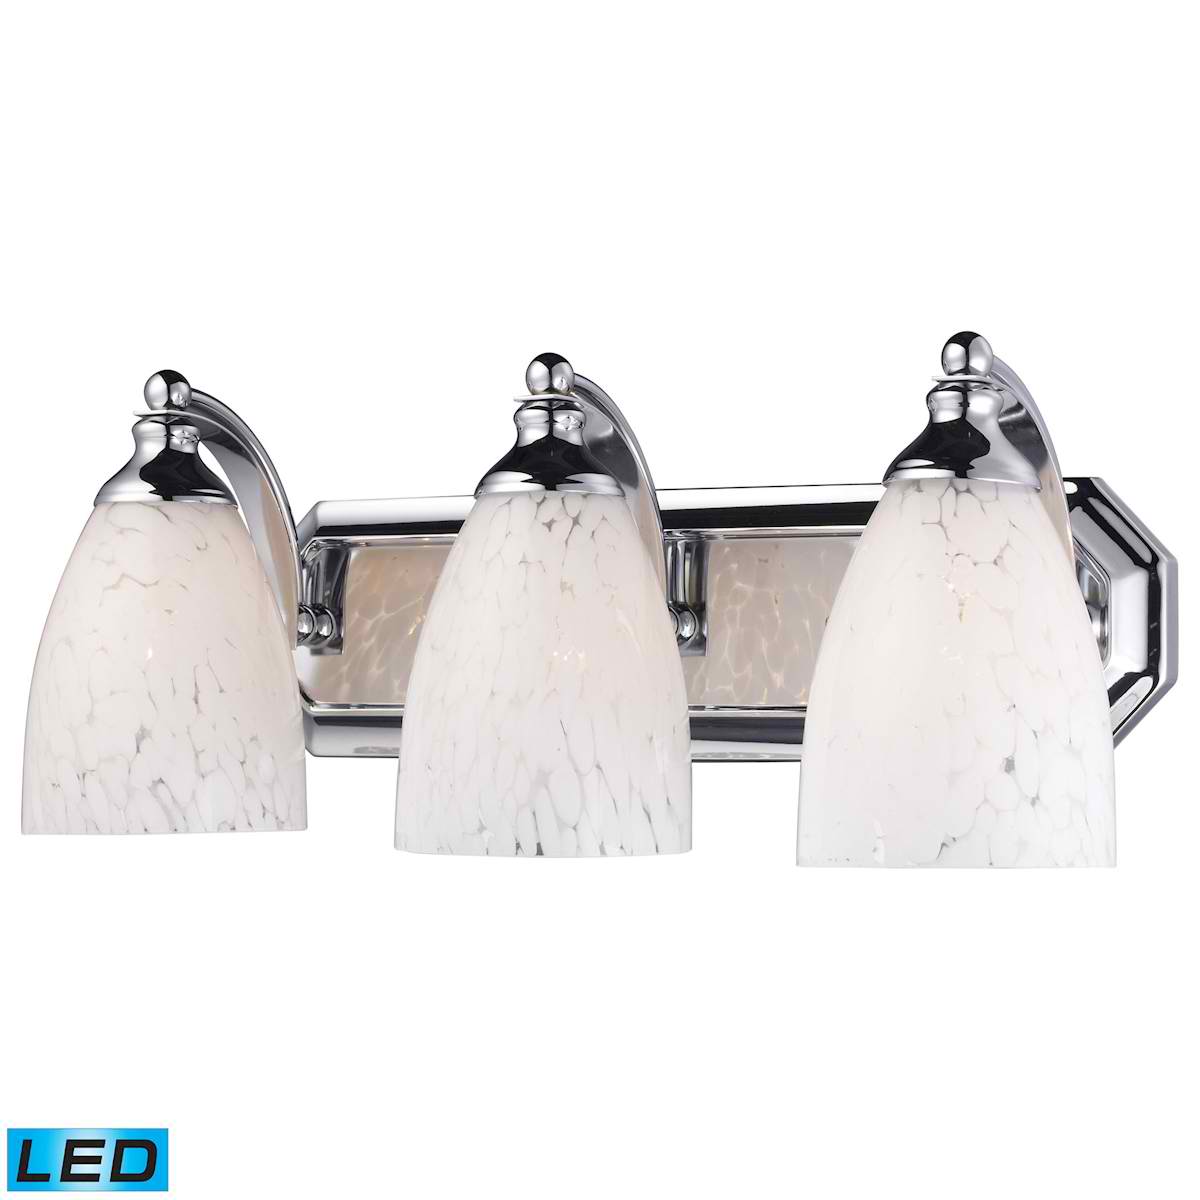 3 Light Vanity in Polished Chrome and Snow White Glass - LED, 800 Lumens (2400 Lumens Total) with Full Scale